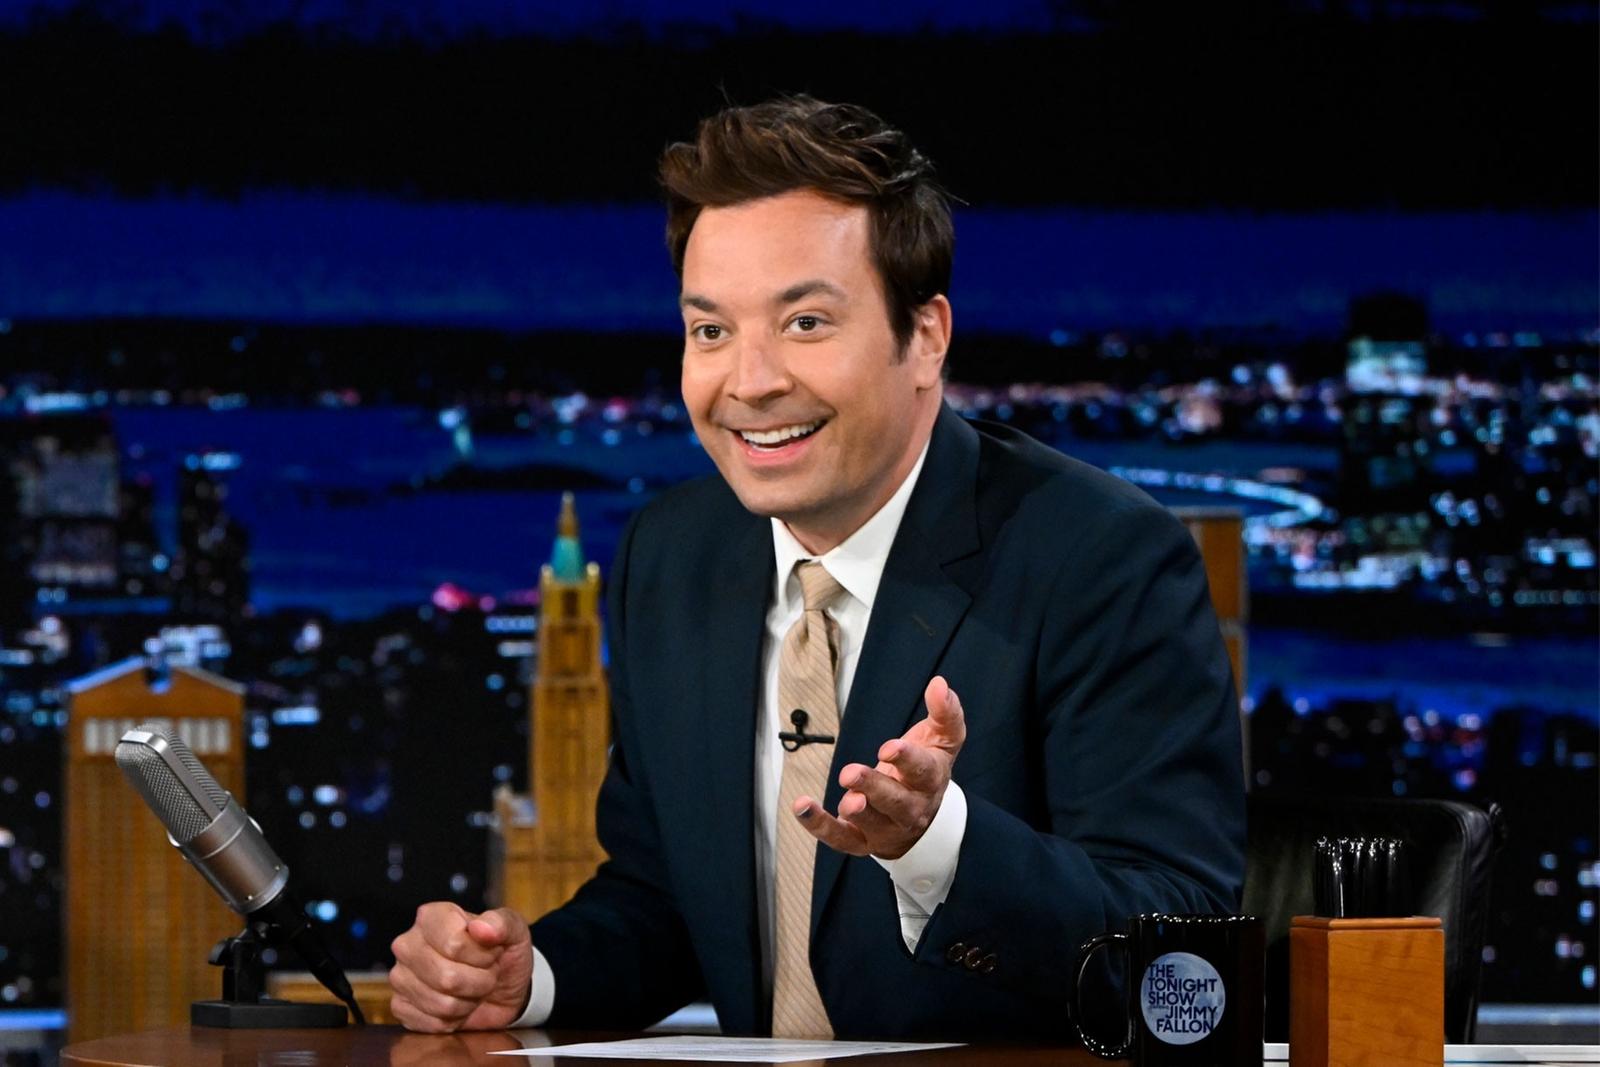 Jimmy Fallon Teases Donald Trump For Hardly Filling Seats At CPAC